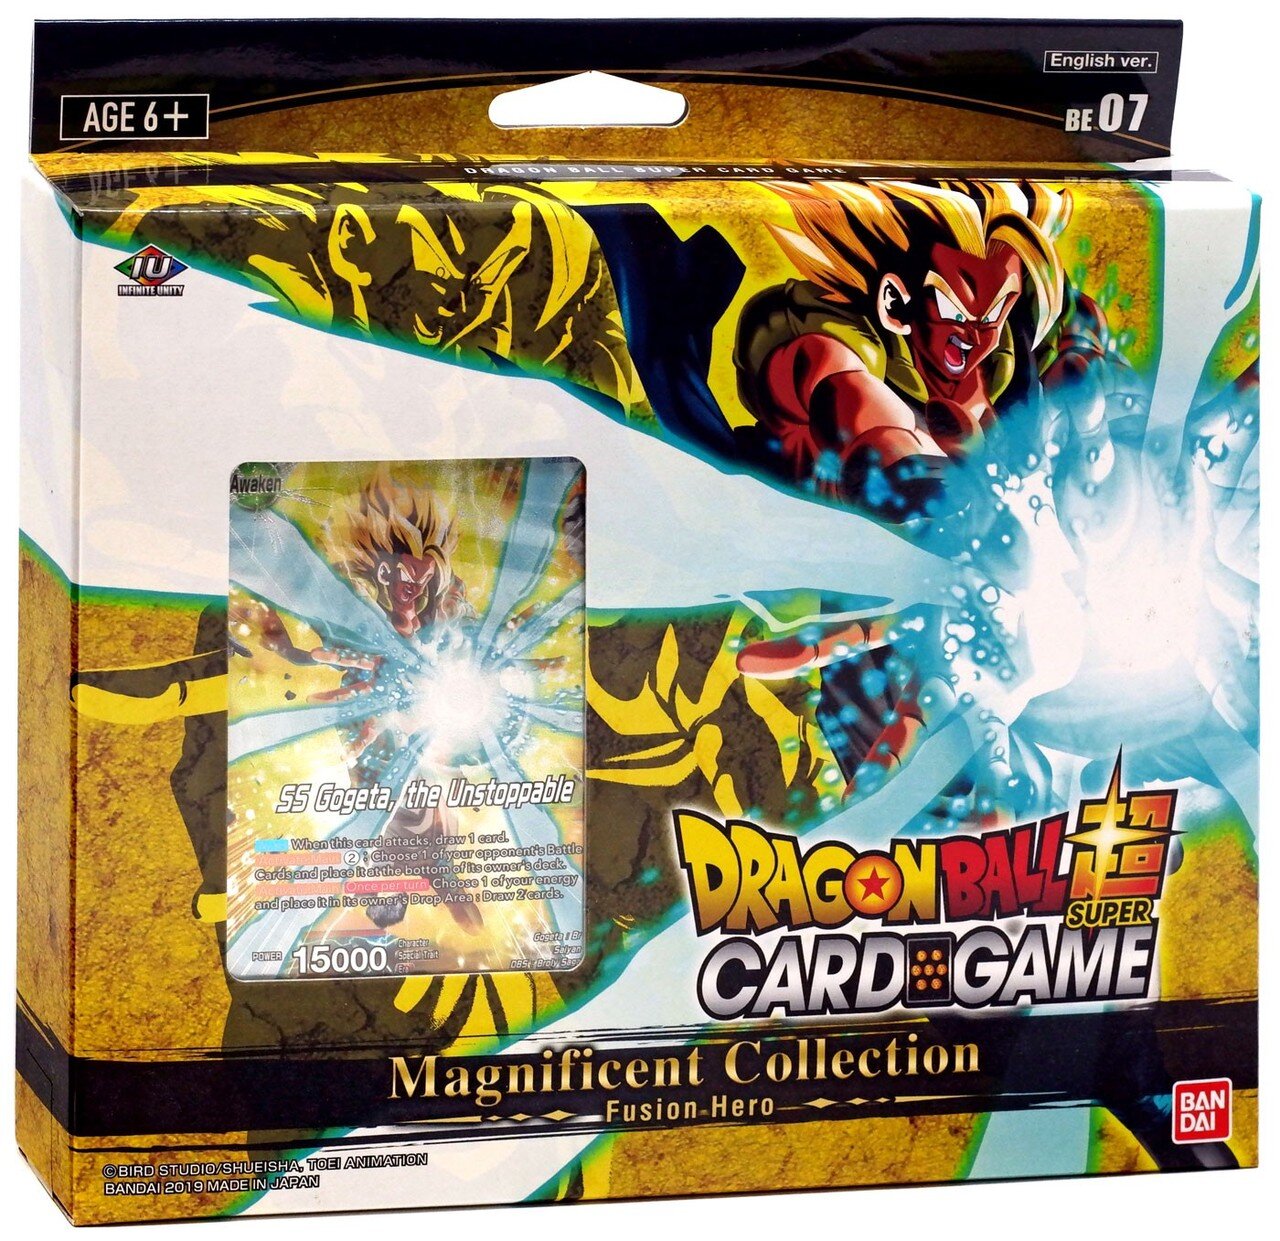 DRAGONBALL SUPER CARD GAME: MAGNIFICENT COLLECTION GOGETA: BR VER. BE07 —  Okami cards